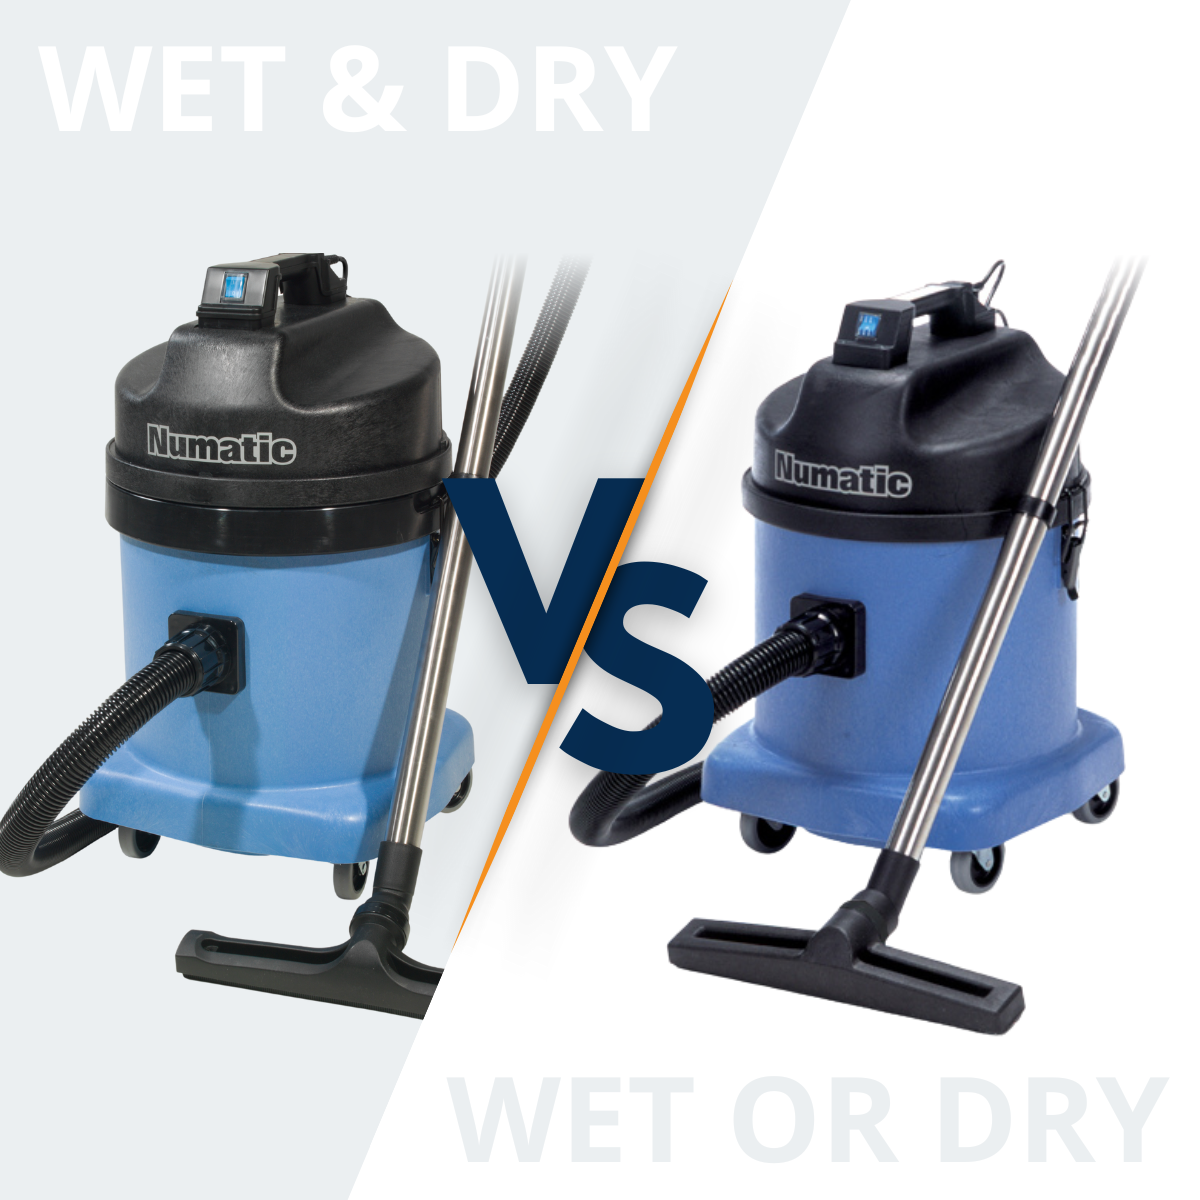 Wet AND Dry vs Wet OR Dry Vacuums - What's the Difference?